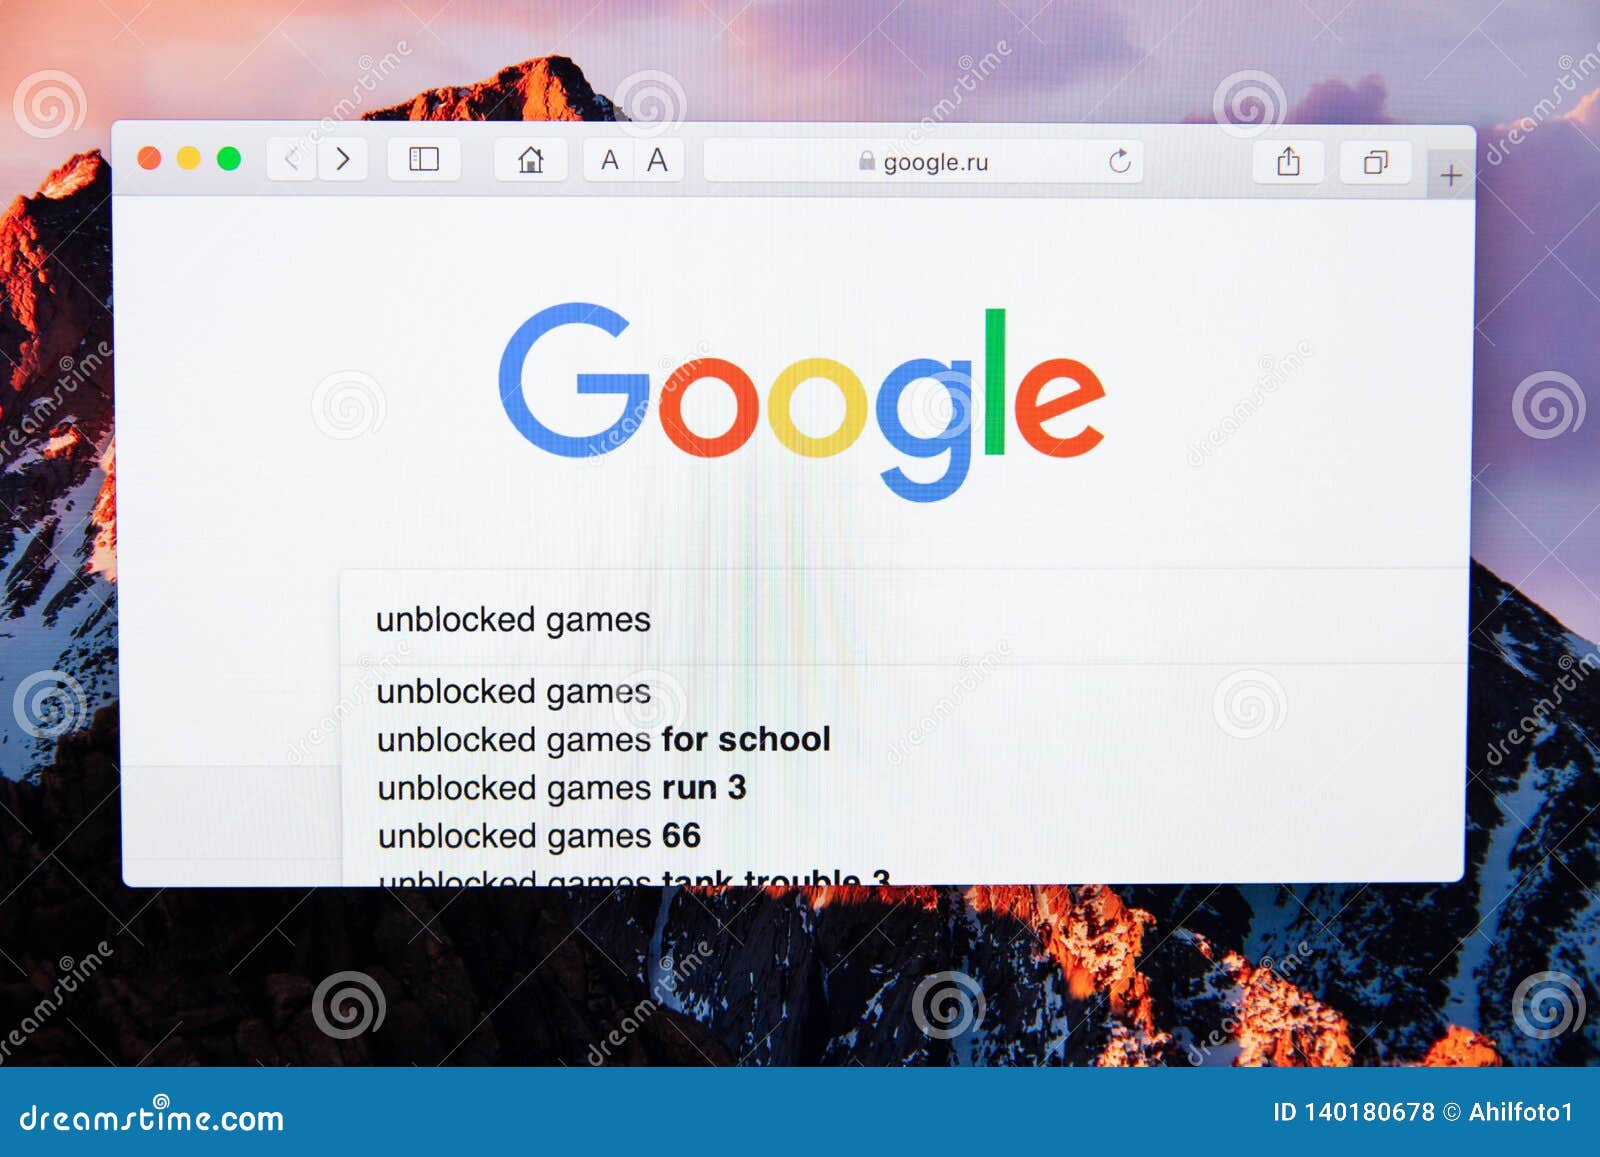 Search for Google Unblocked Games